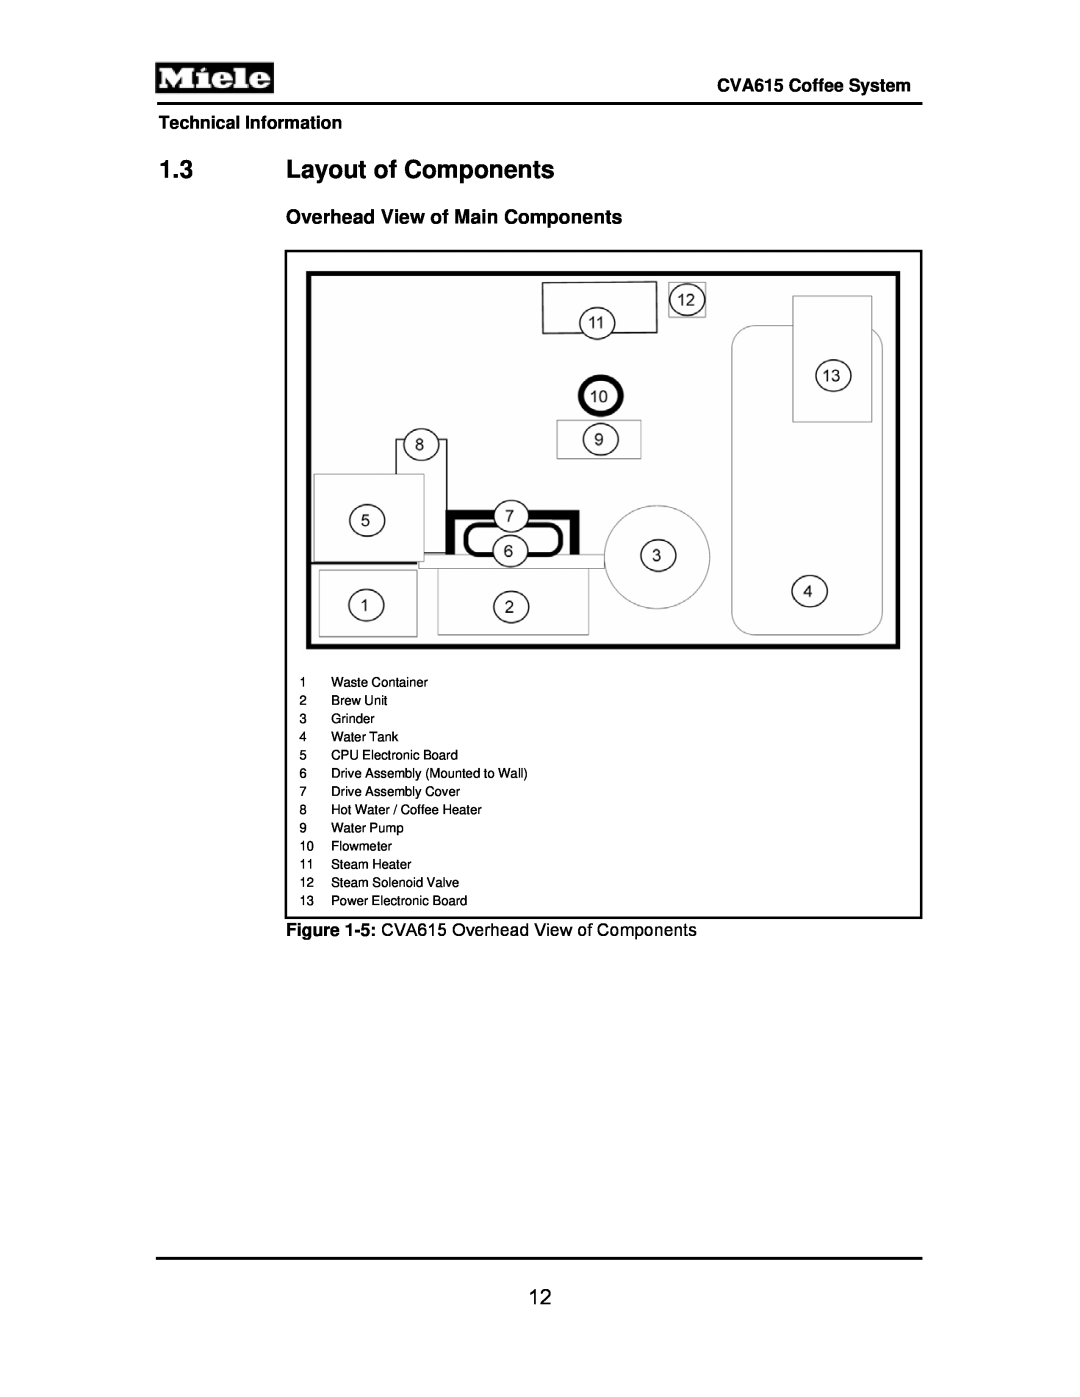 Miele manual 1.3Layout of Components, CVA615 Coffee System Technical Information, 5CPU Electronic Board 